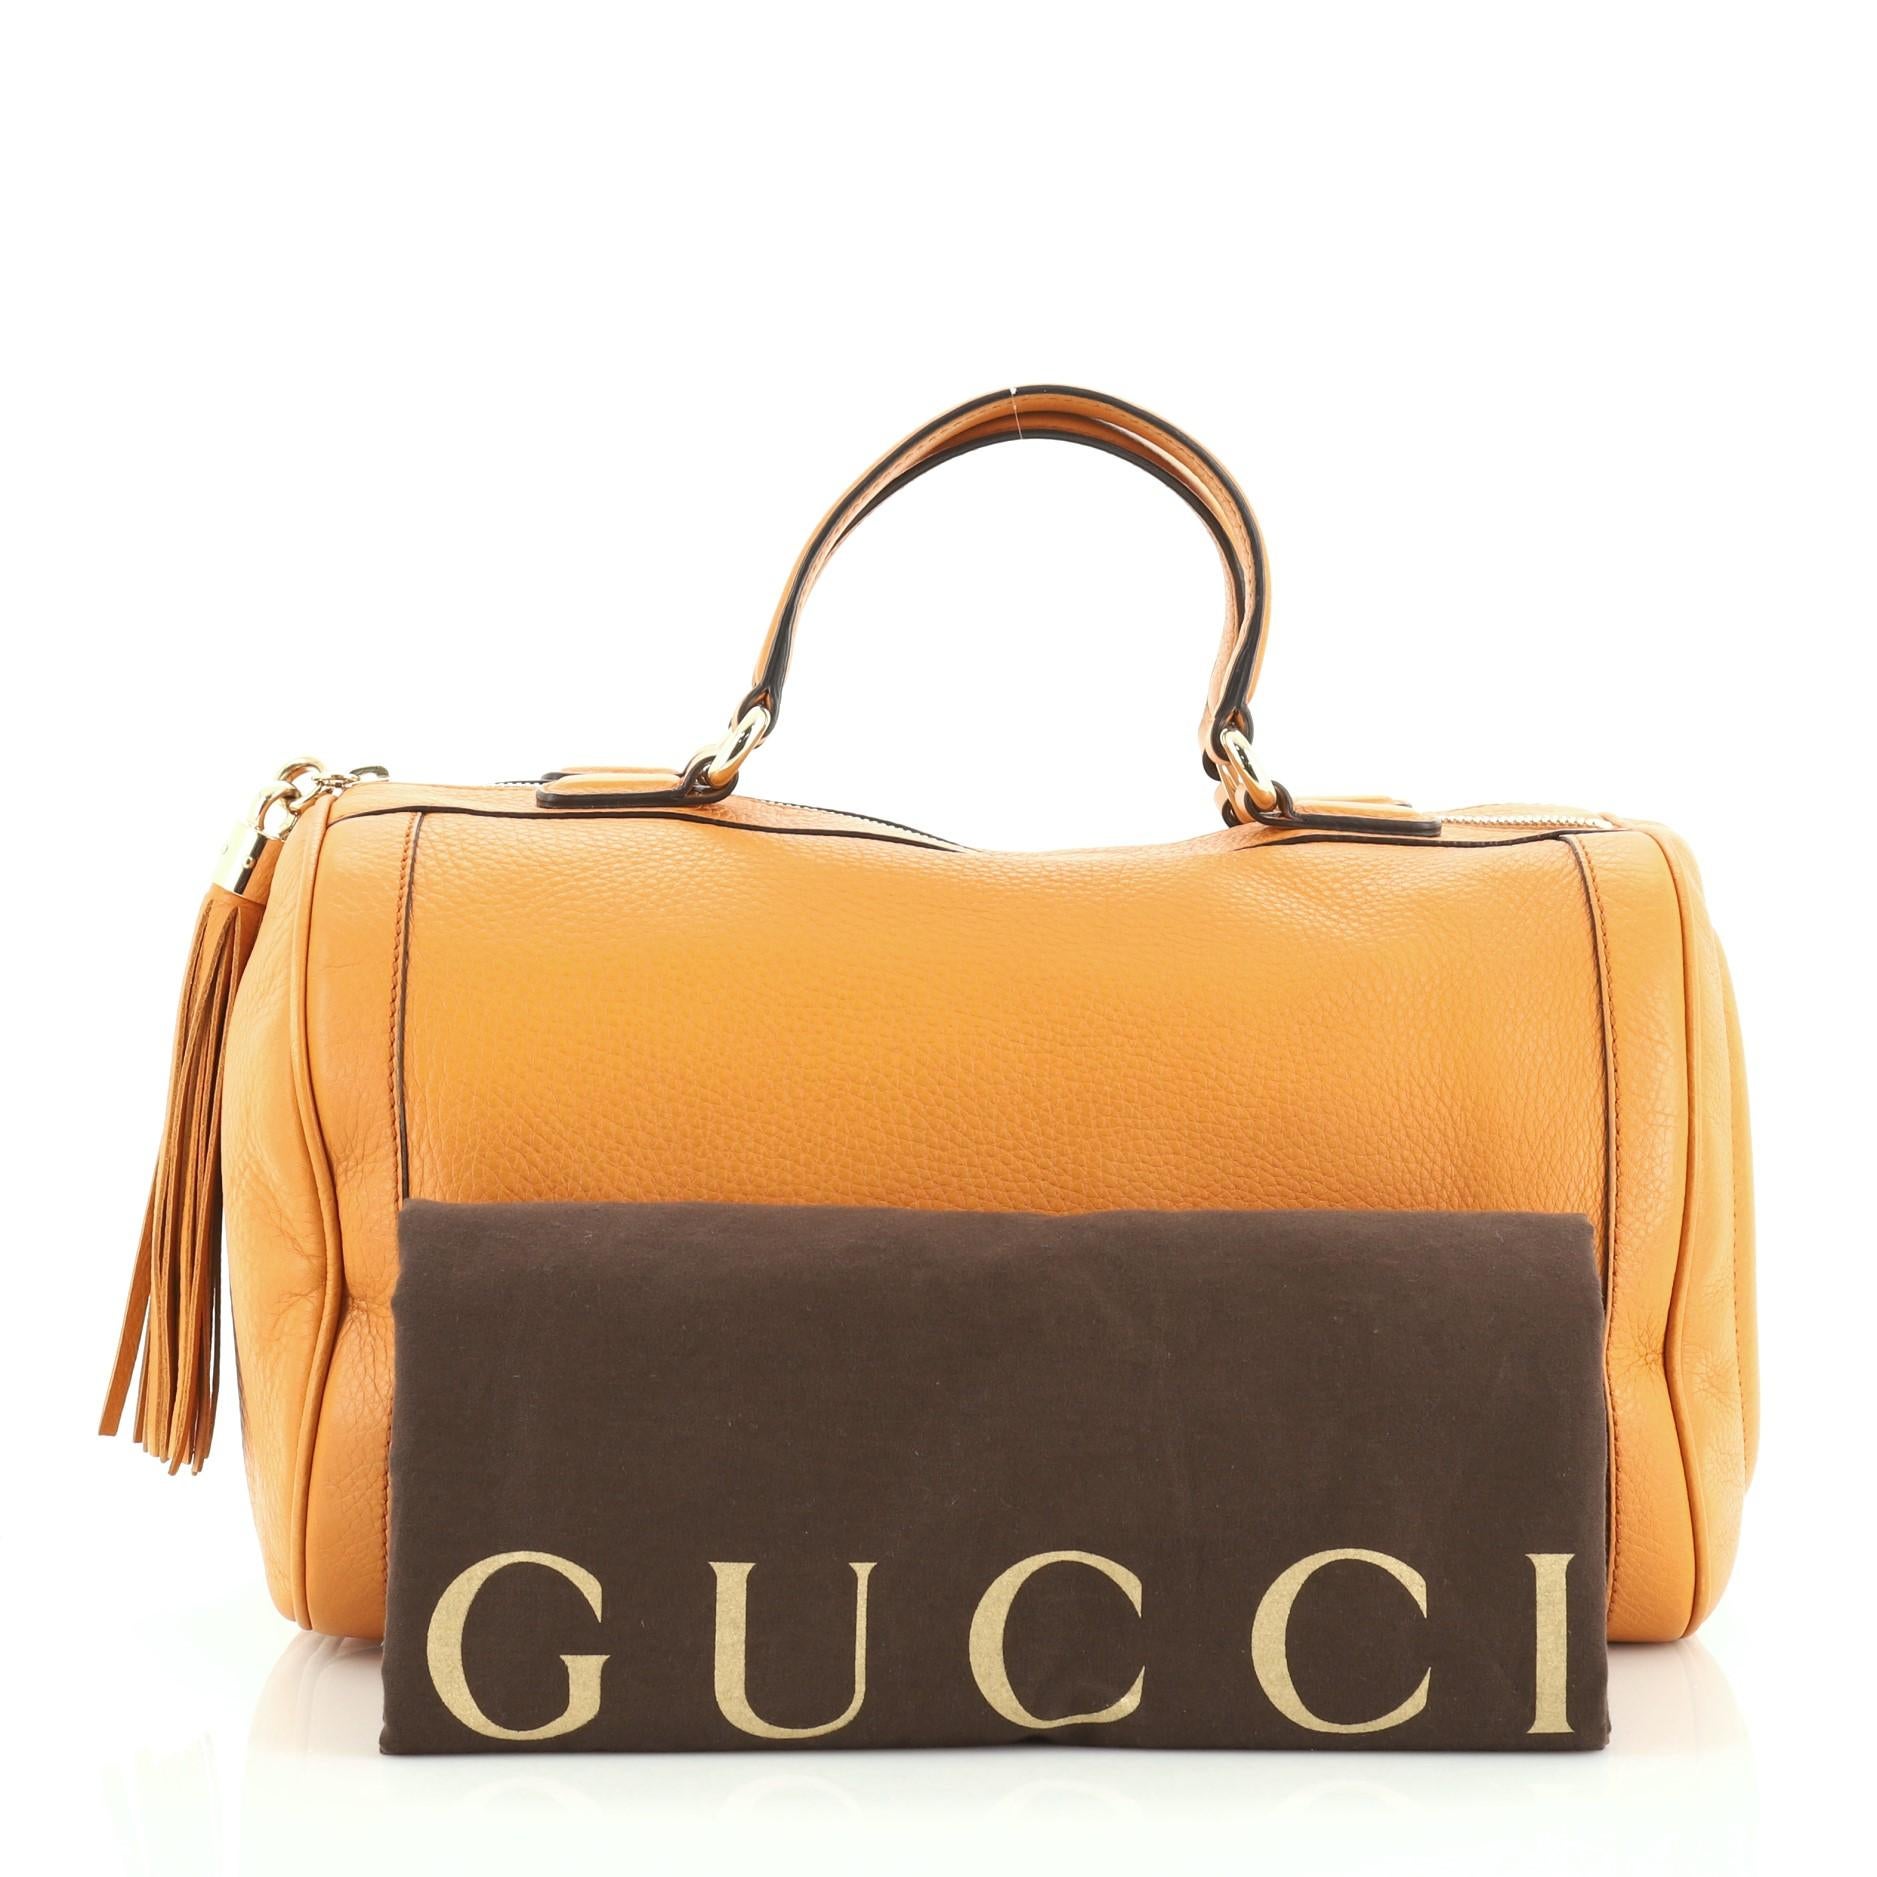 This Gucci Soho Boston Bag Leather, crafted in orange leather, features dual flat handles, tassel zipper pull accent, stitched GG logo at the side, protective base studs and gold-tone hardware. Its zip closure opens to a neutral fabric interior with